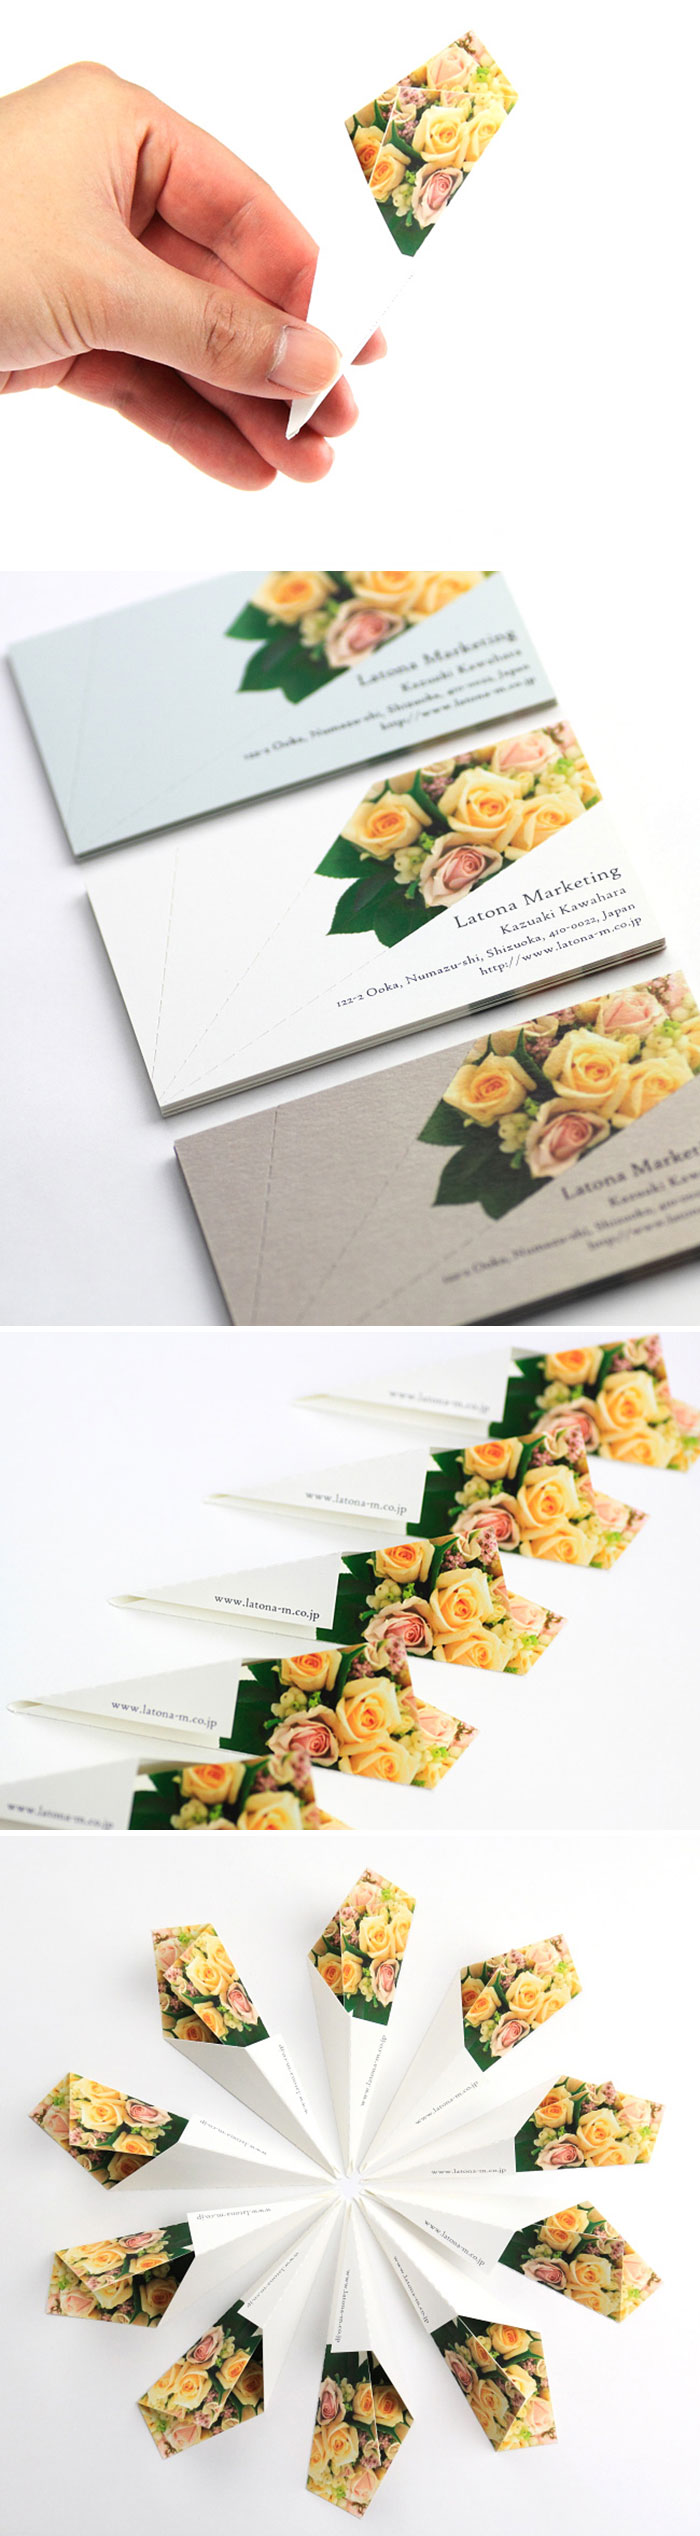 This Is A Business Card Designed To "Put A Smile On One’s Face." When Folded, It Turns Into A Flower Bouquet